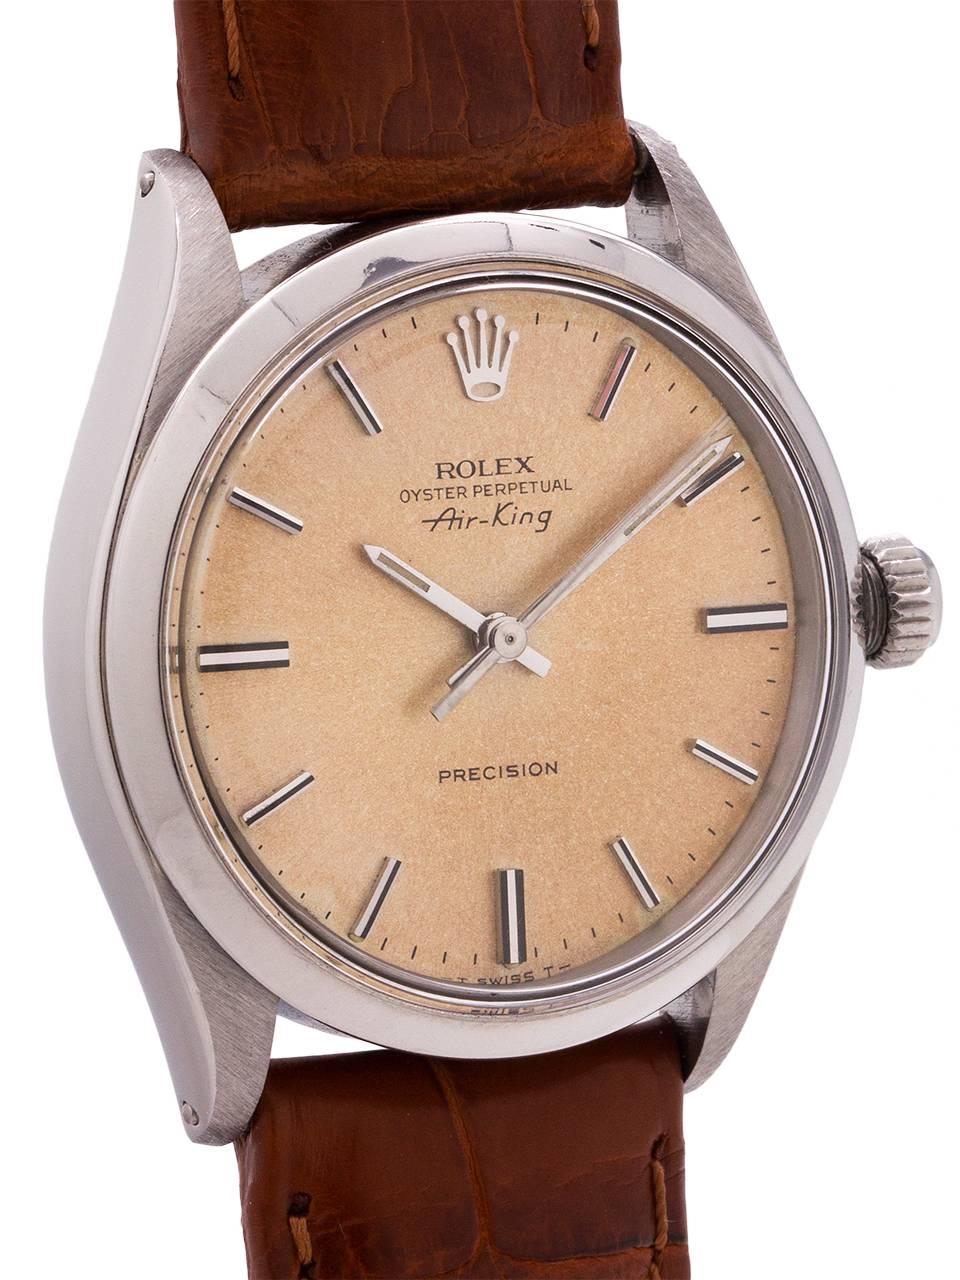 Rolex Stainless Steel Oyster Perpetual Peach Dial Self-Winding Wristwatch, c1973 In Excellent Condition For Sale In West Hollywood, CA